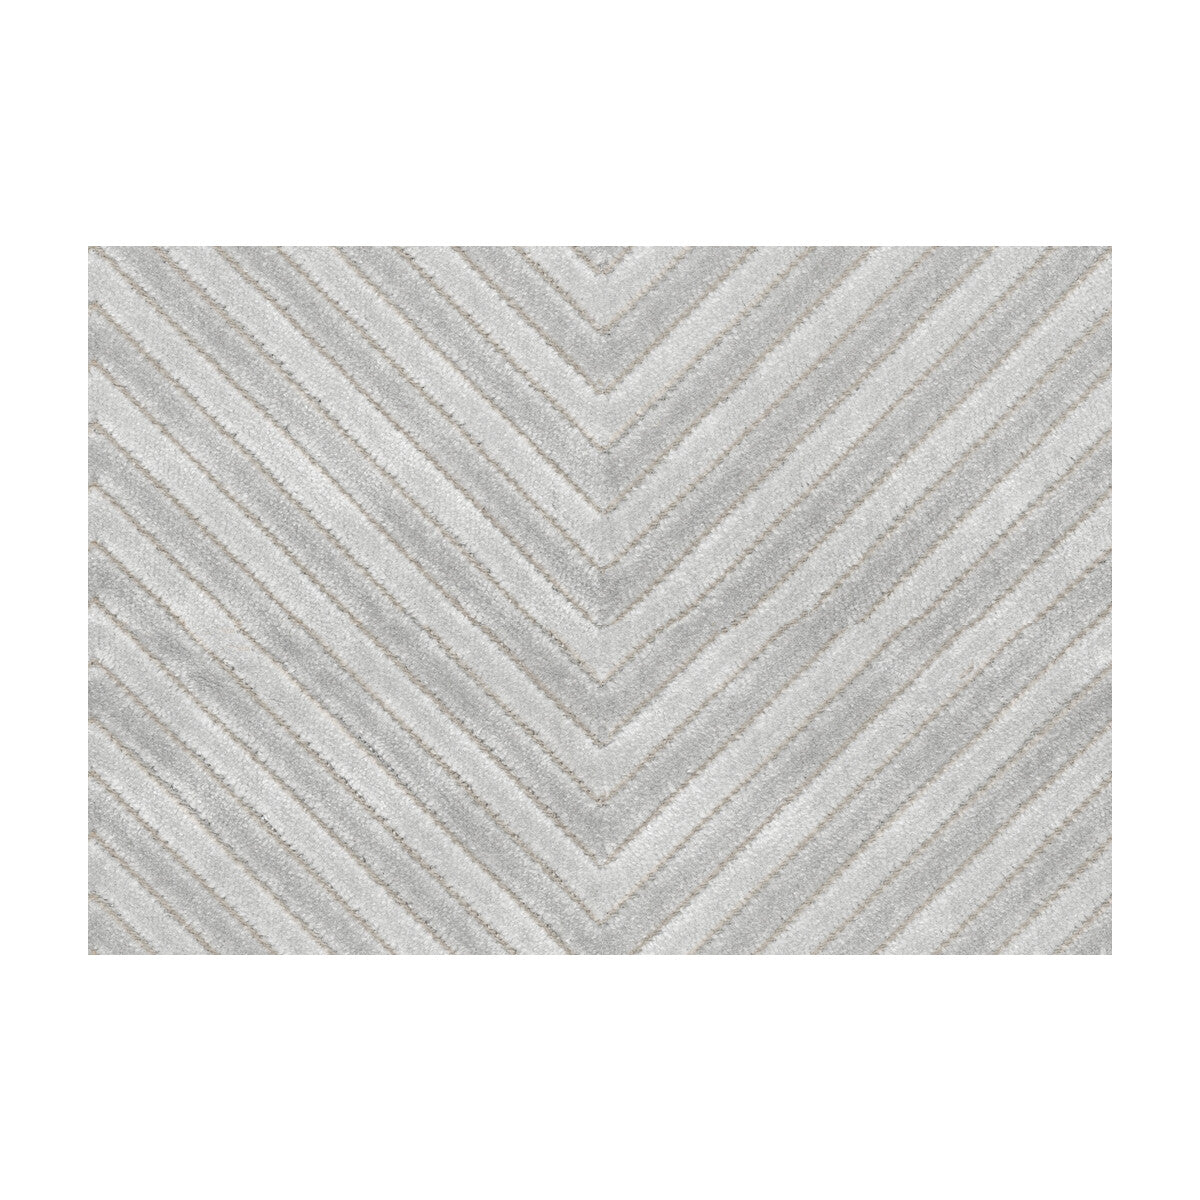 Wishbone fabric in silver color - pattern 36041.11.0 - by Kravet Contract in the Sarah Richardson Harmony collection